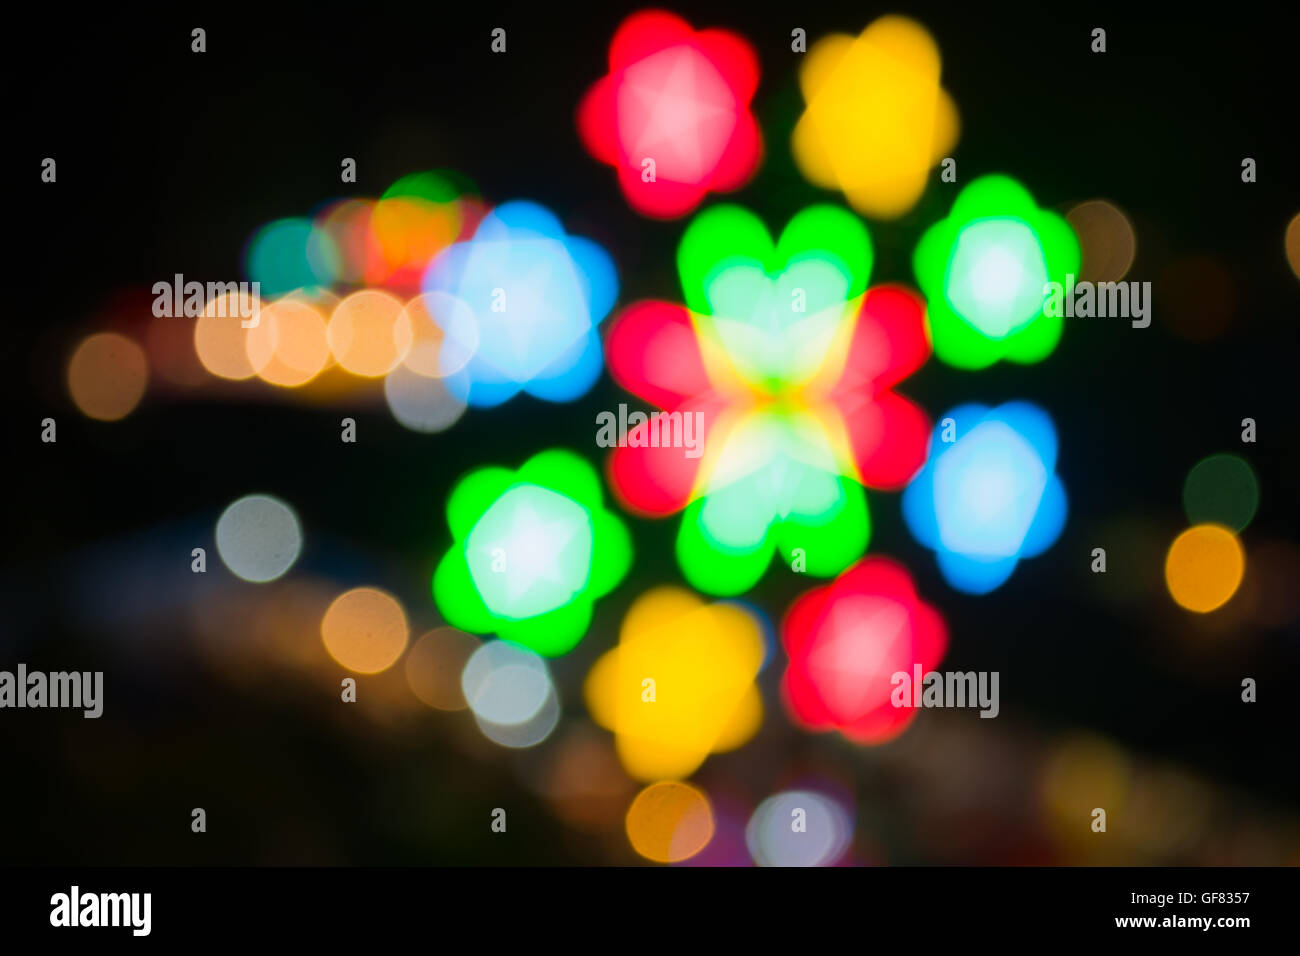 Abstract circular bokeh background from tree or light Stock Photo